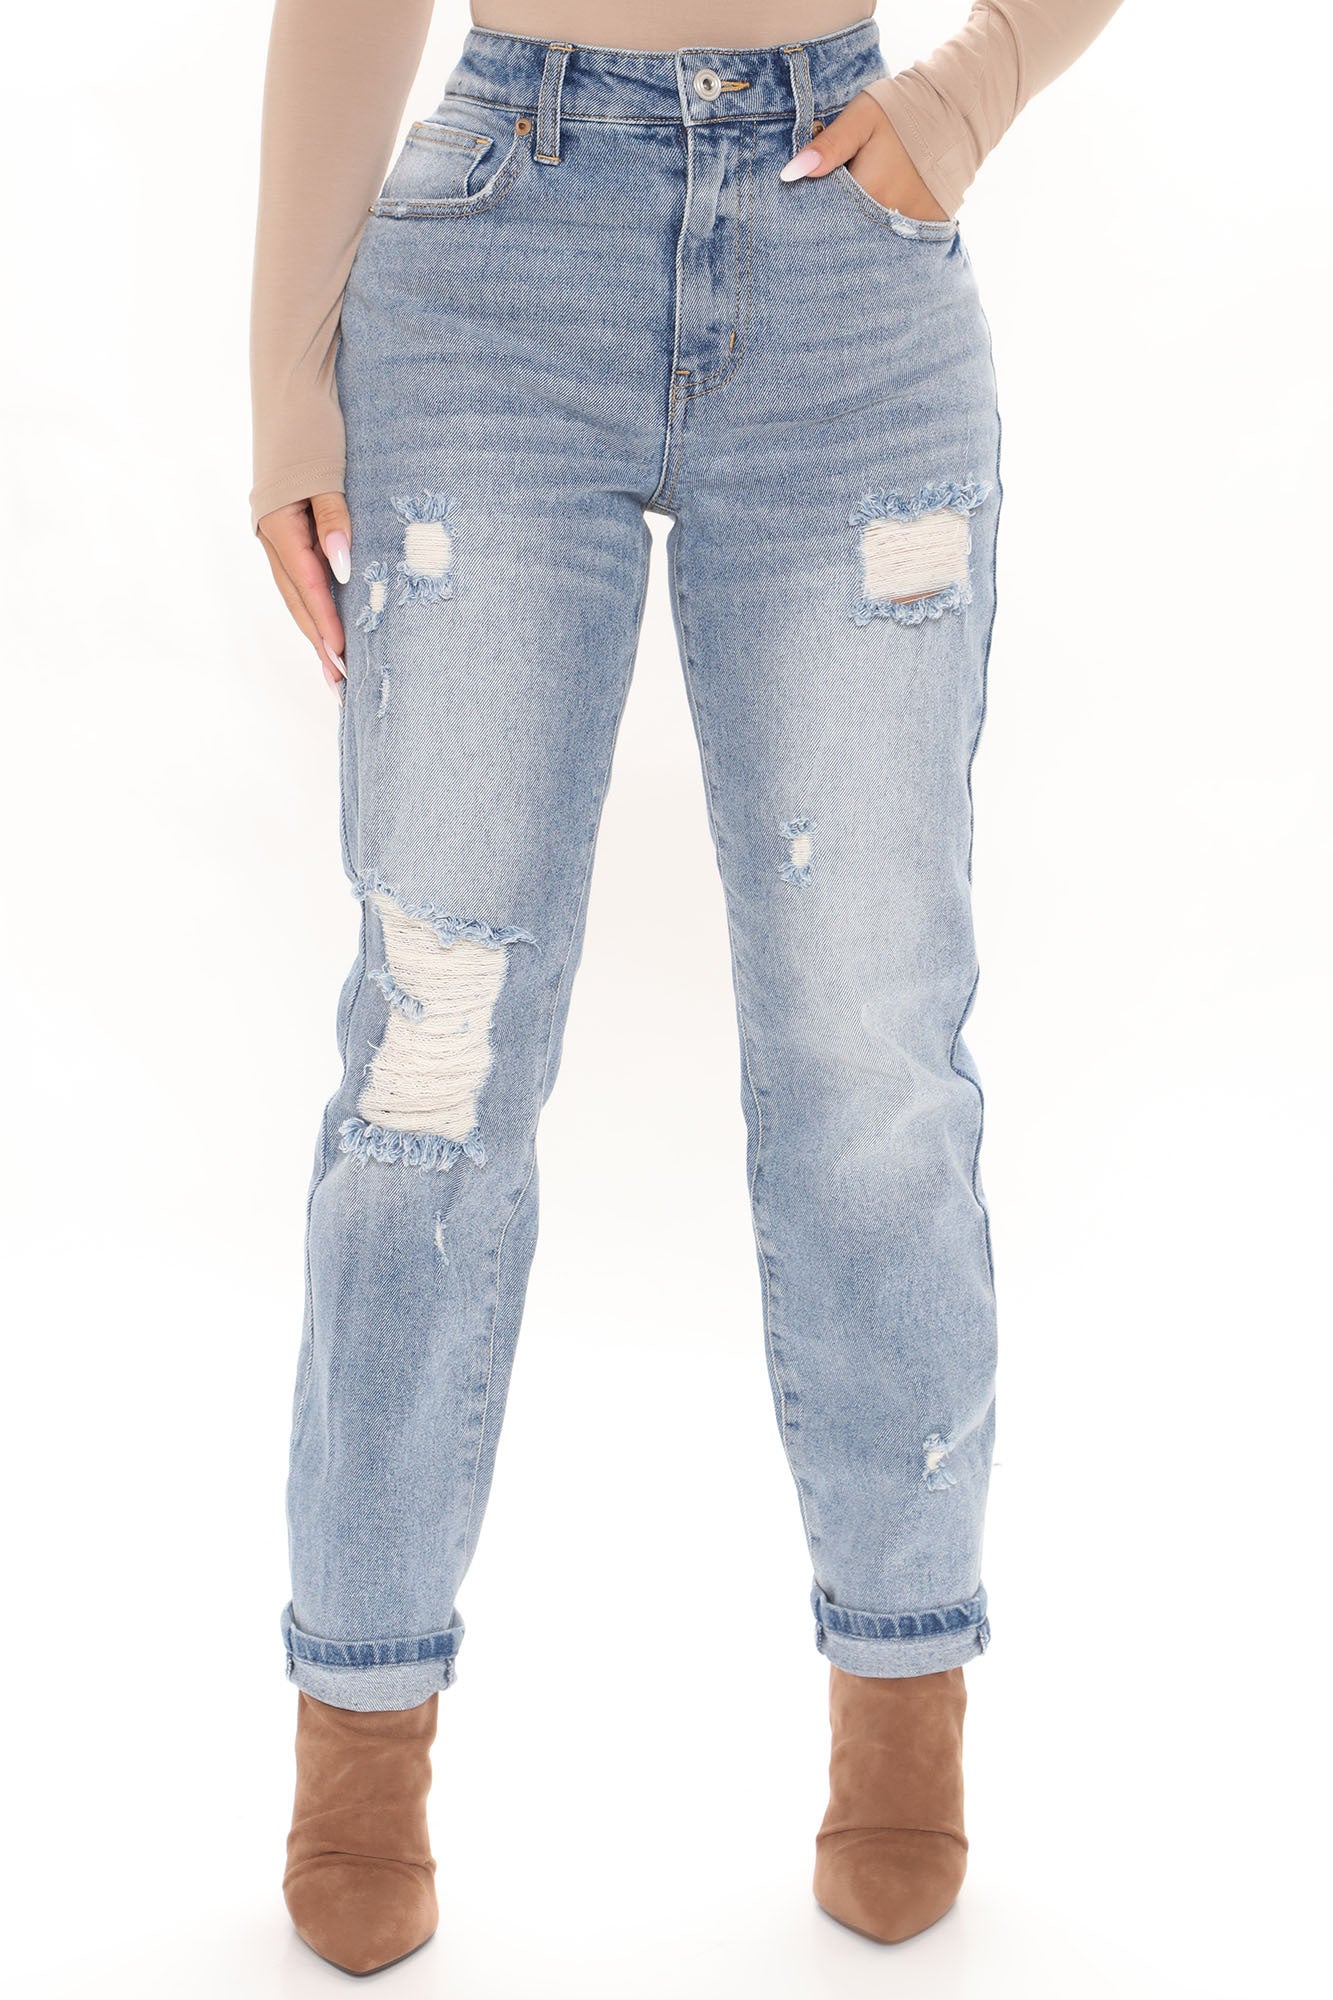 Your Other Boyfriend Distressed High Rise Jeans - Medium Blue Wash